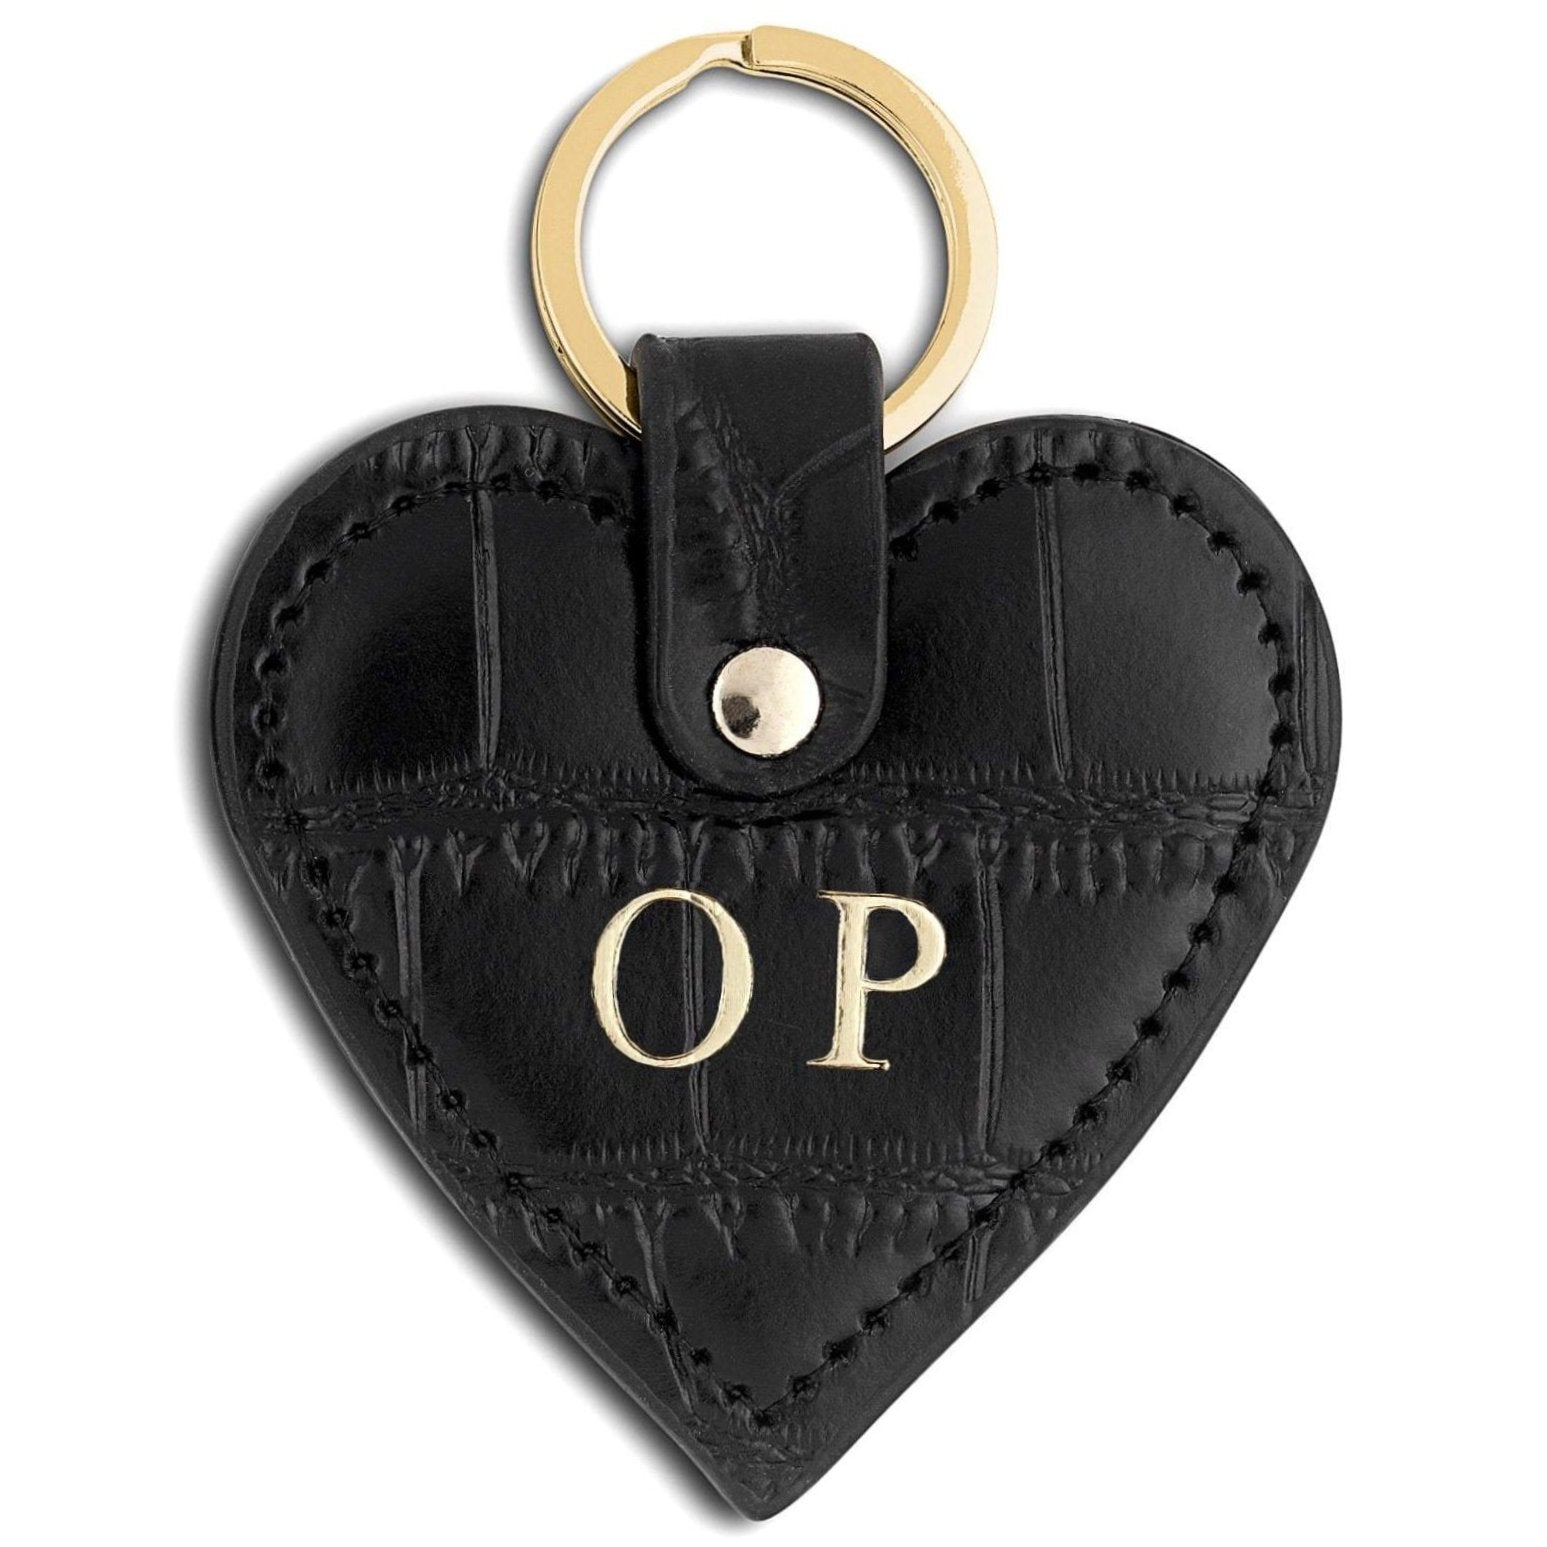 Personalised Black Croc Leather Heart Key Ring